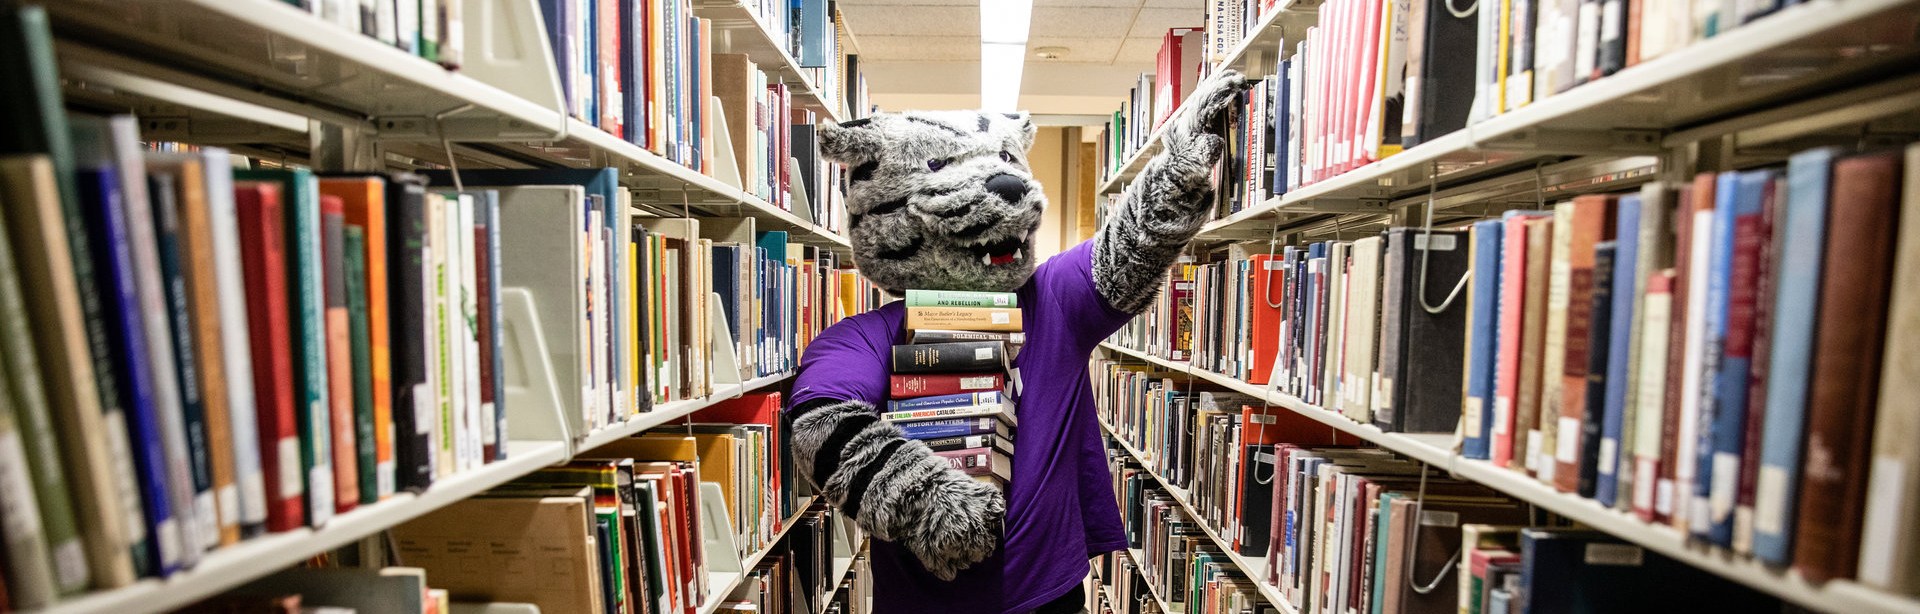 tommie mascot carrying books between shelves in o'shaughnessy-frey library